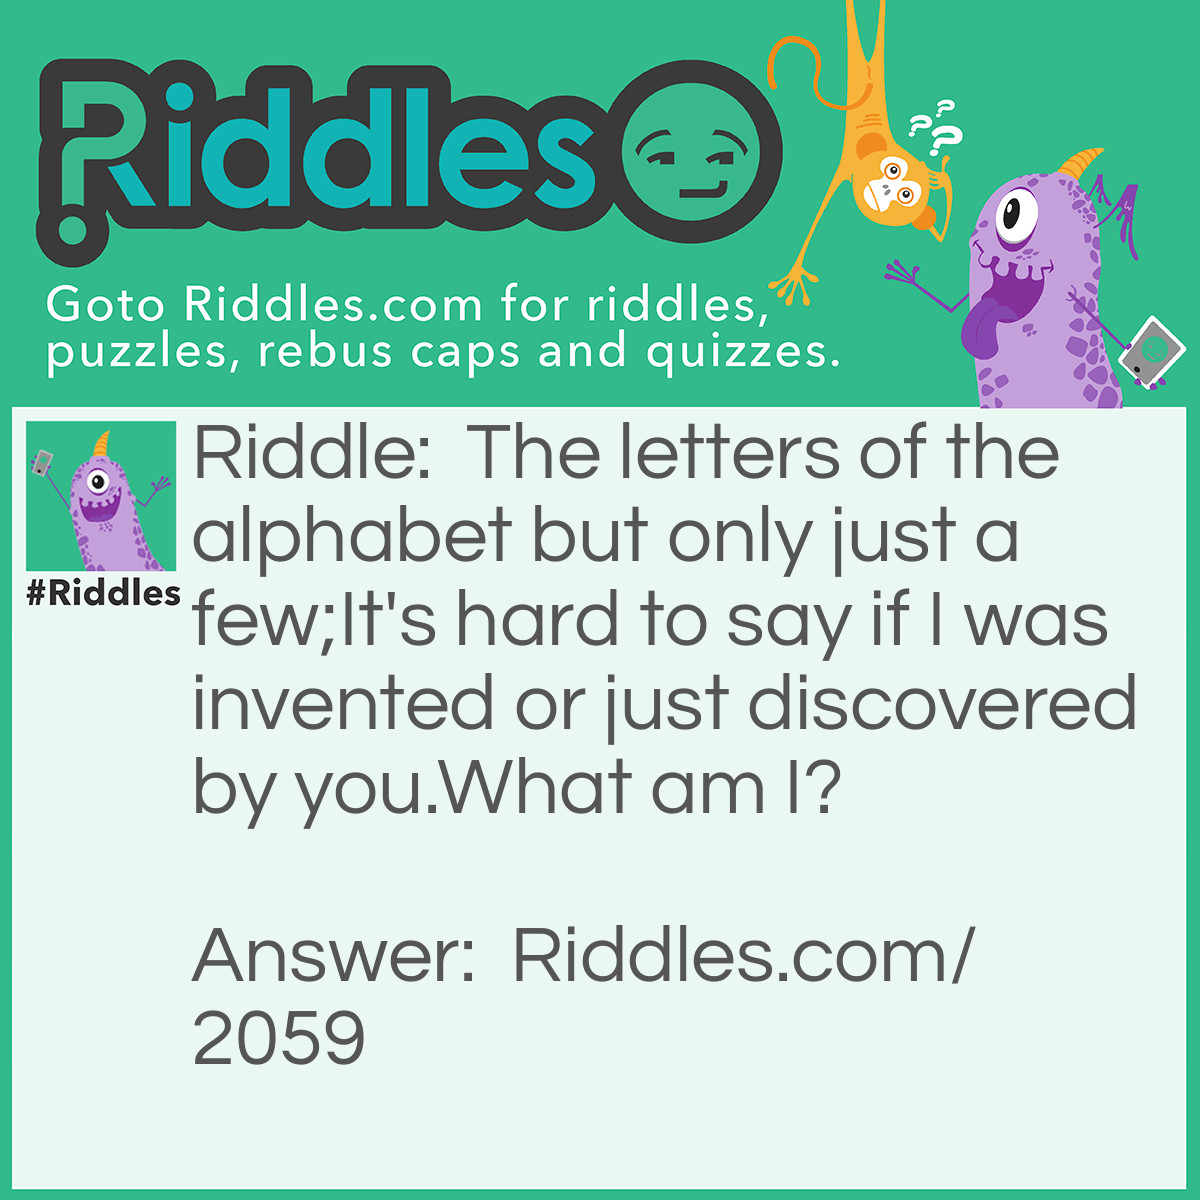 Riddle: The letters of the alphabet but only just a few;
It's hard to say if I was invented or just discovered by you.
What am I? Answer: Music